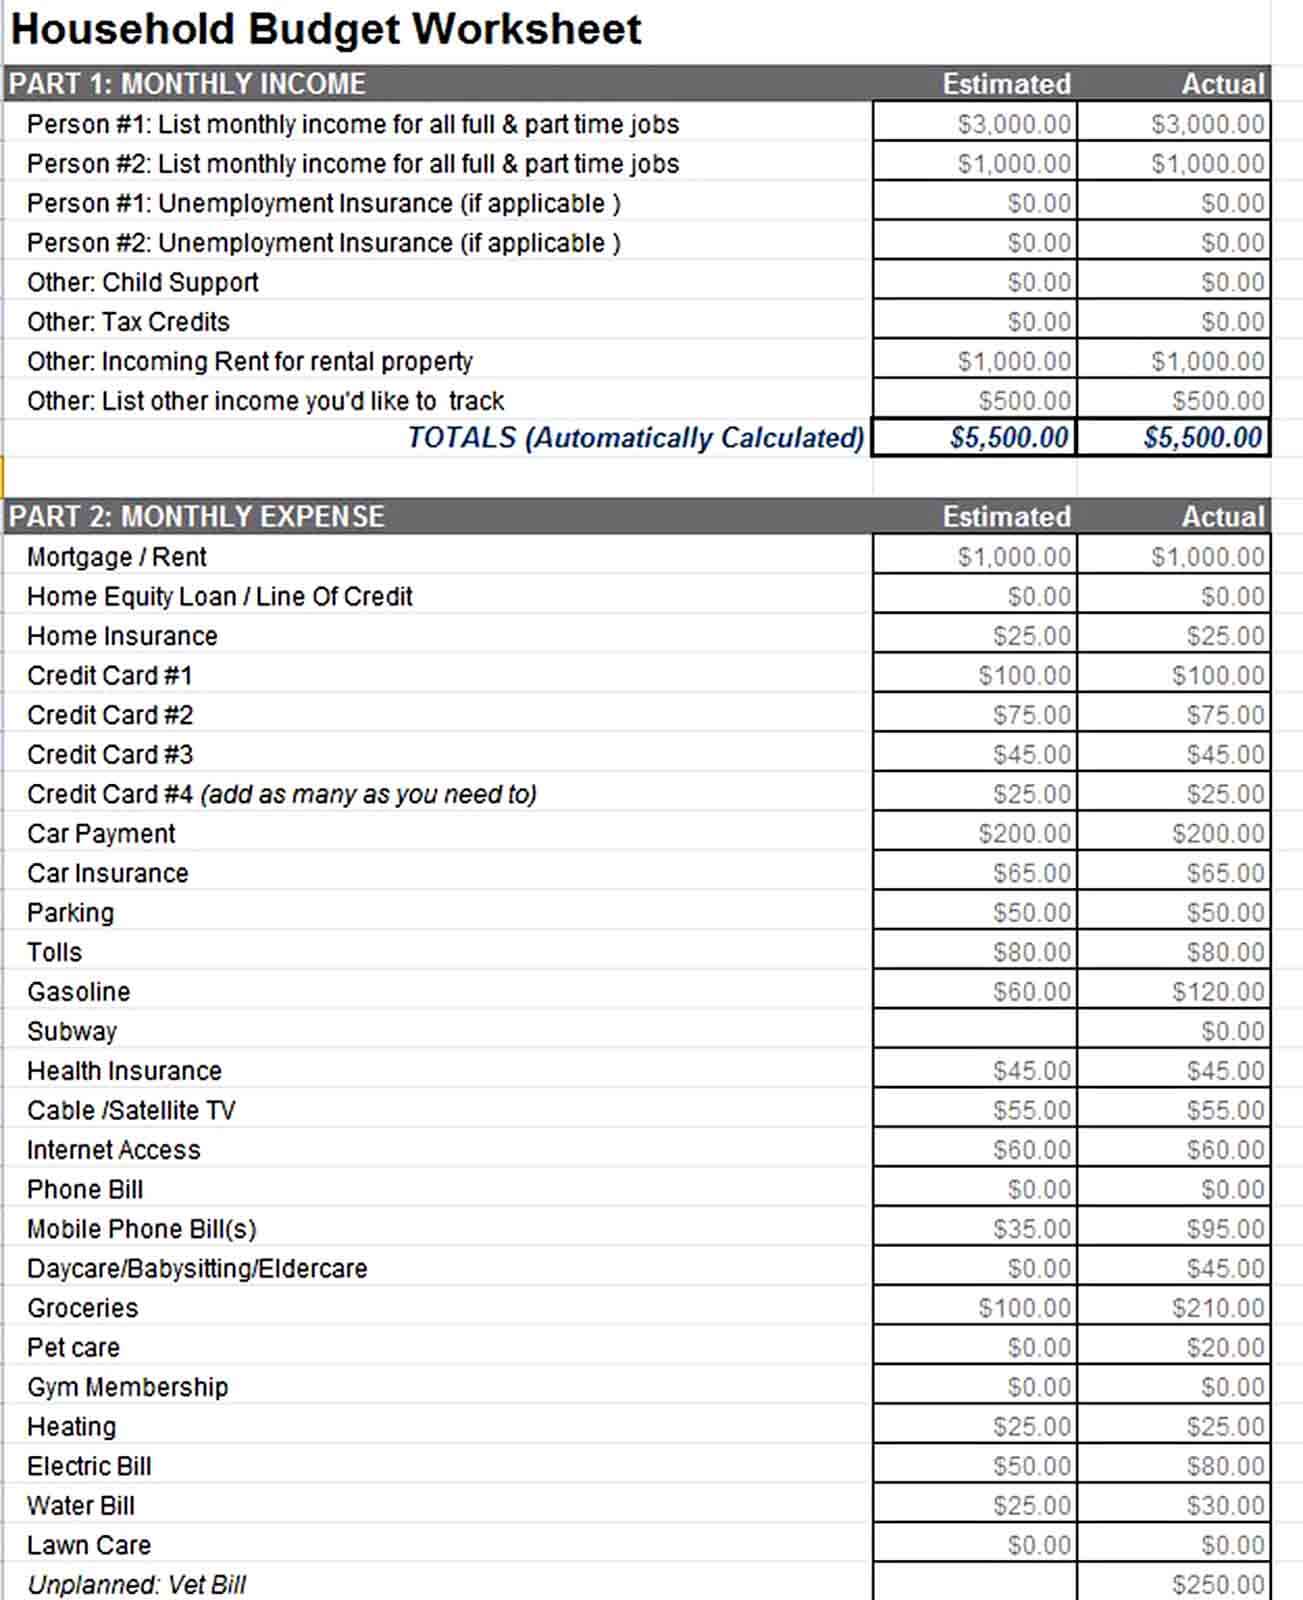 Household Budget Worksheet Template Free Download